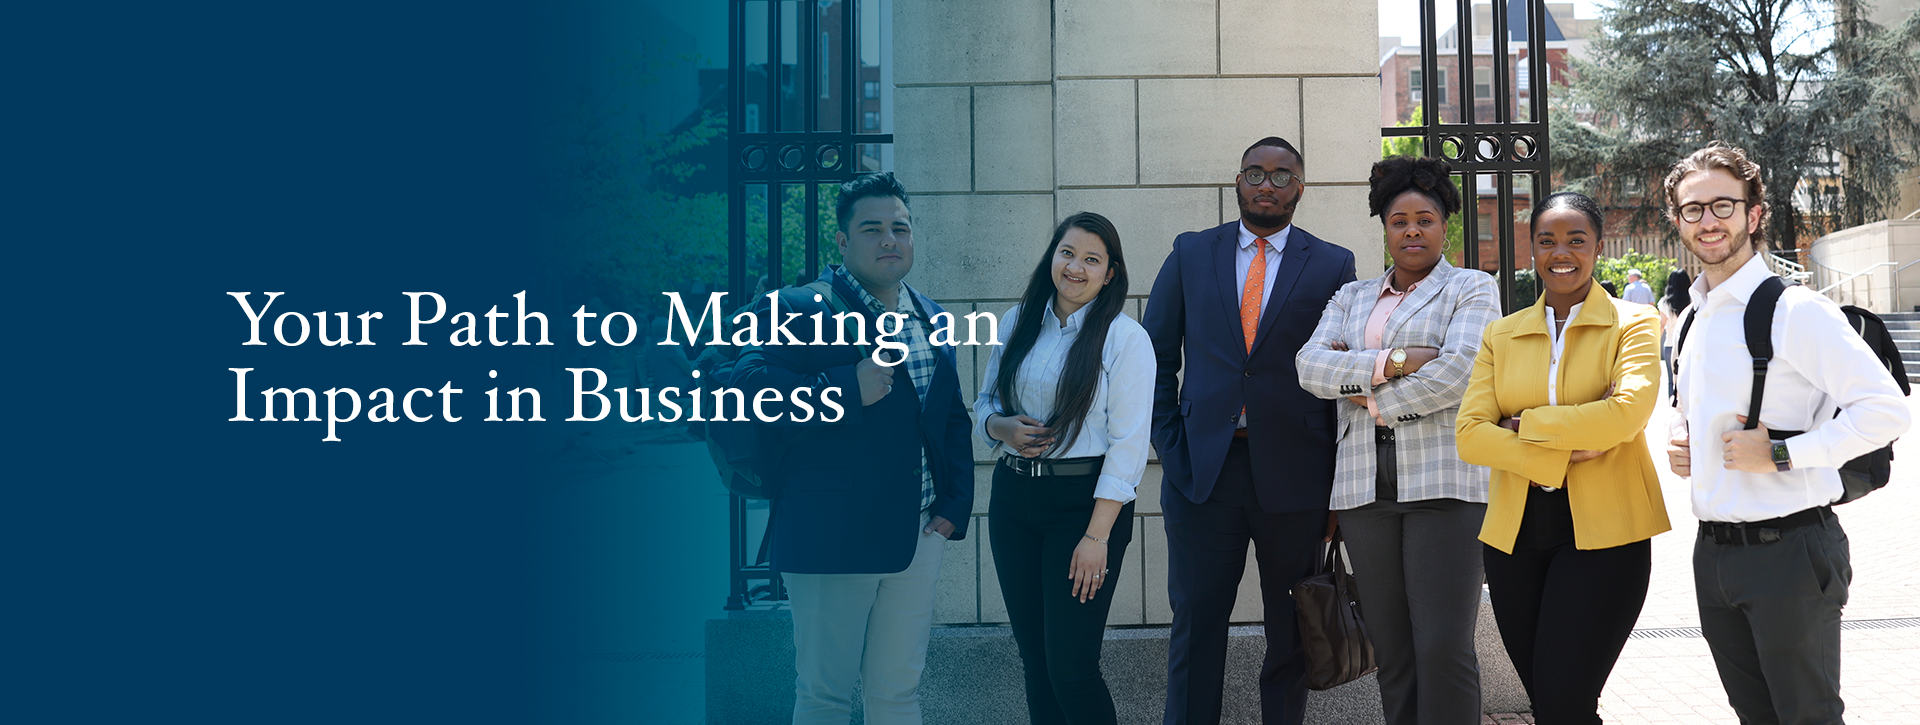 Your Path to Making an Impact in Business. Image shows six smiling GW School of Business studnets standing in the sunshine in front of Kogan Plaza on the GW University campus.